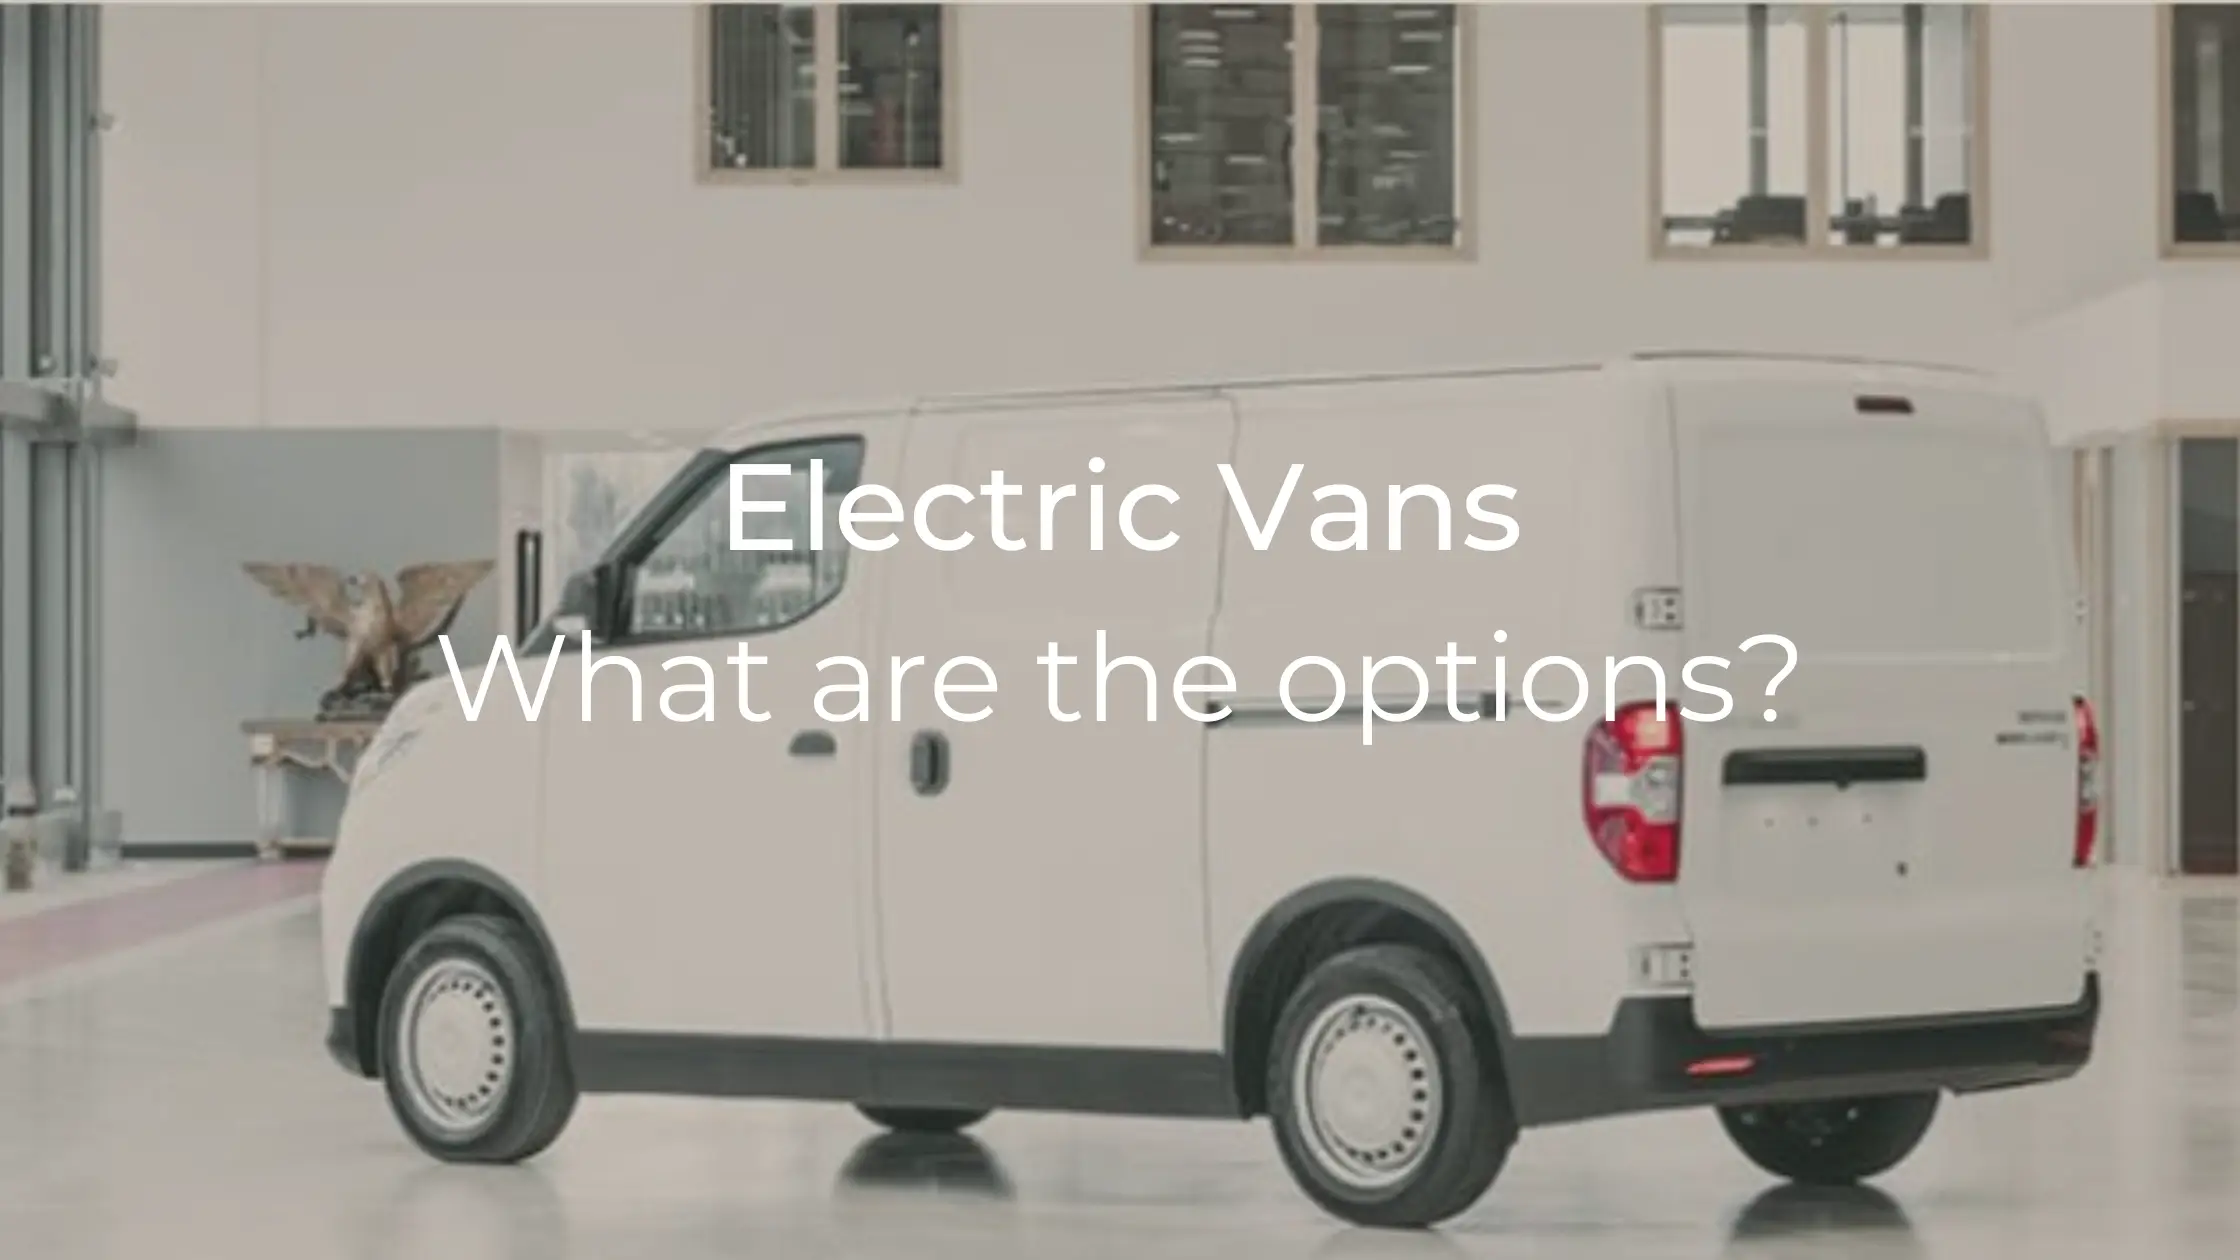 Electric Vans - What Options are Available?